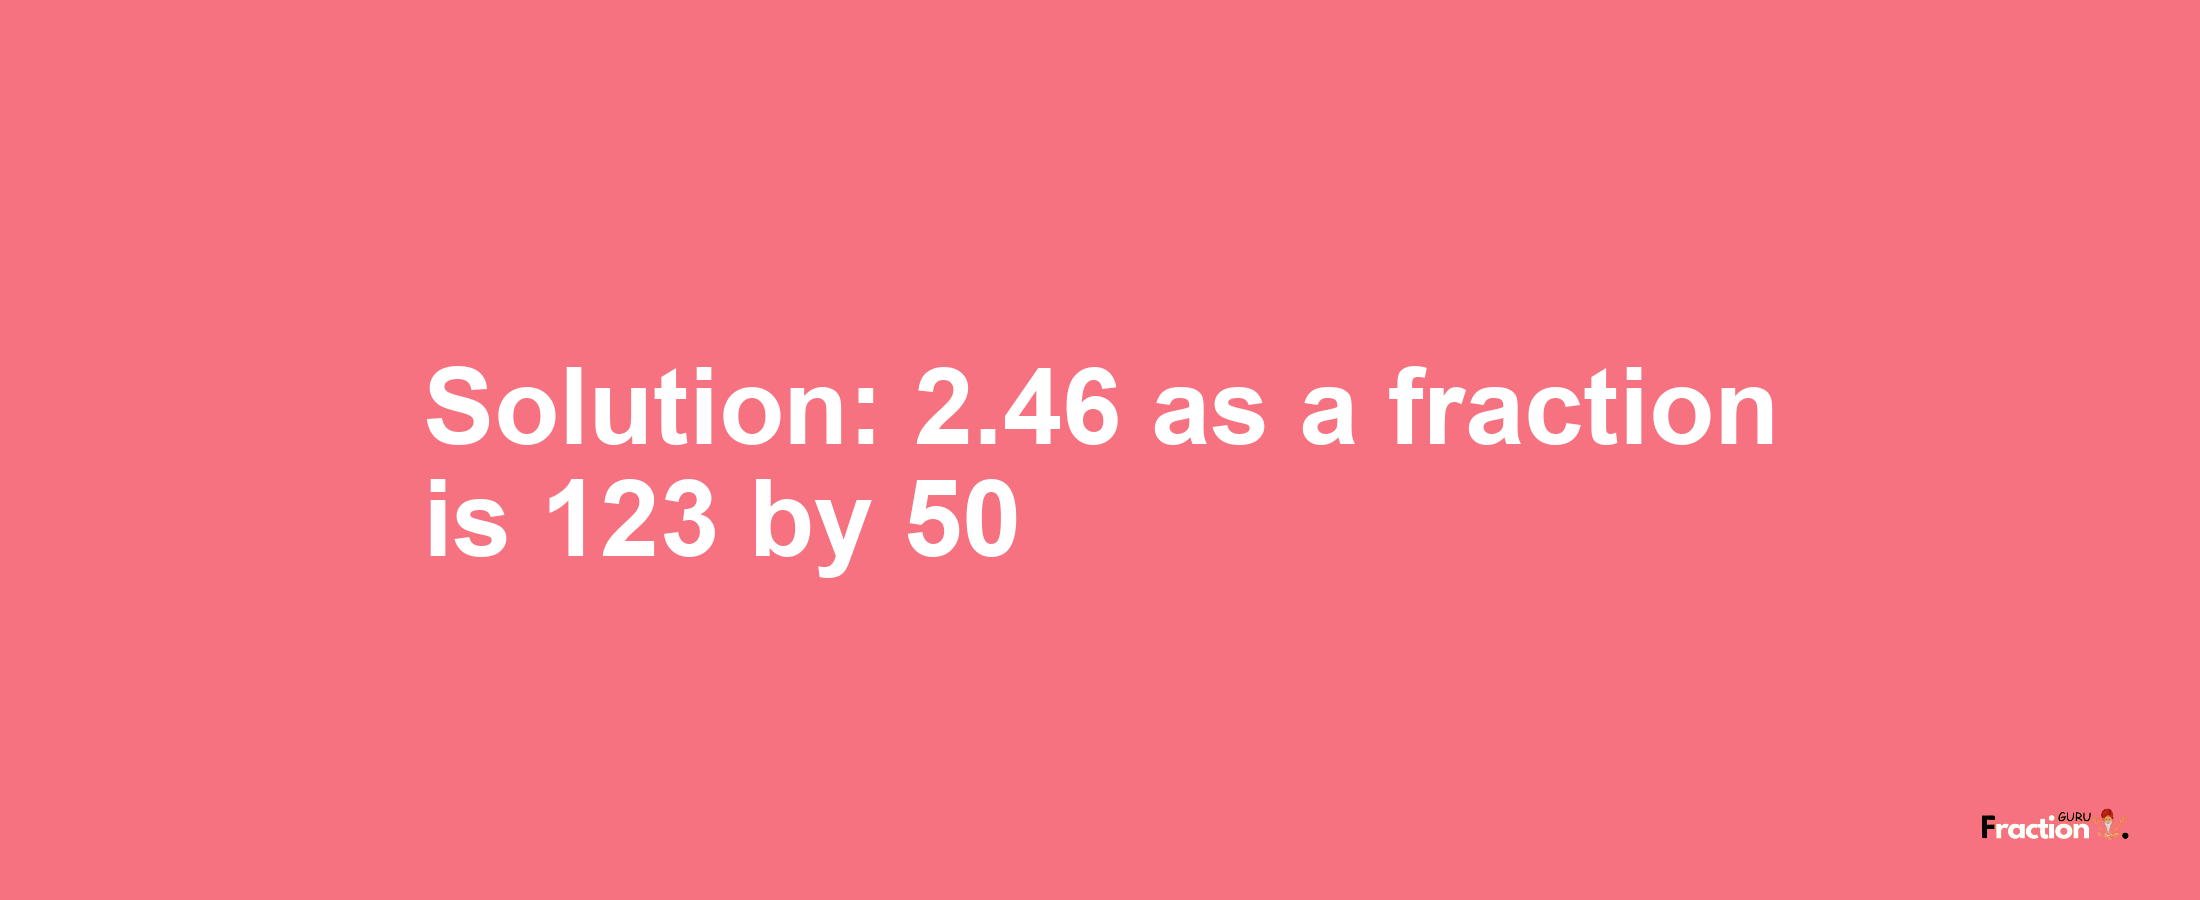 Solution:2.46 as a fraction is 123/50